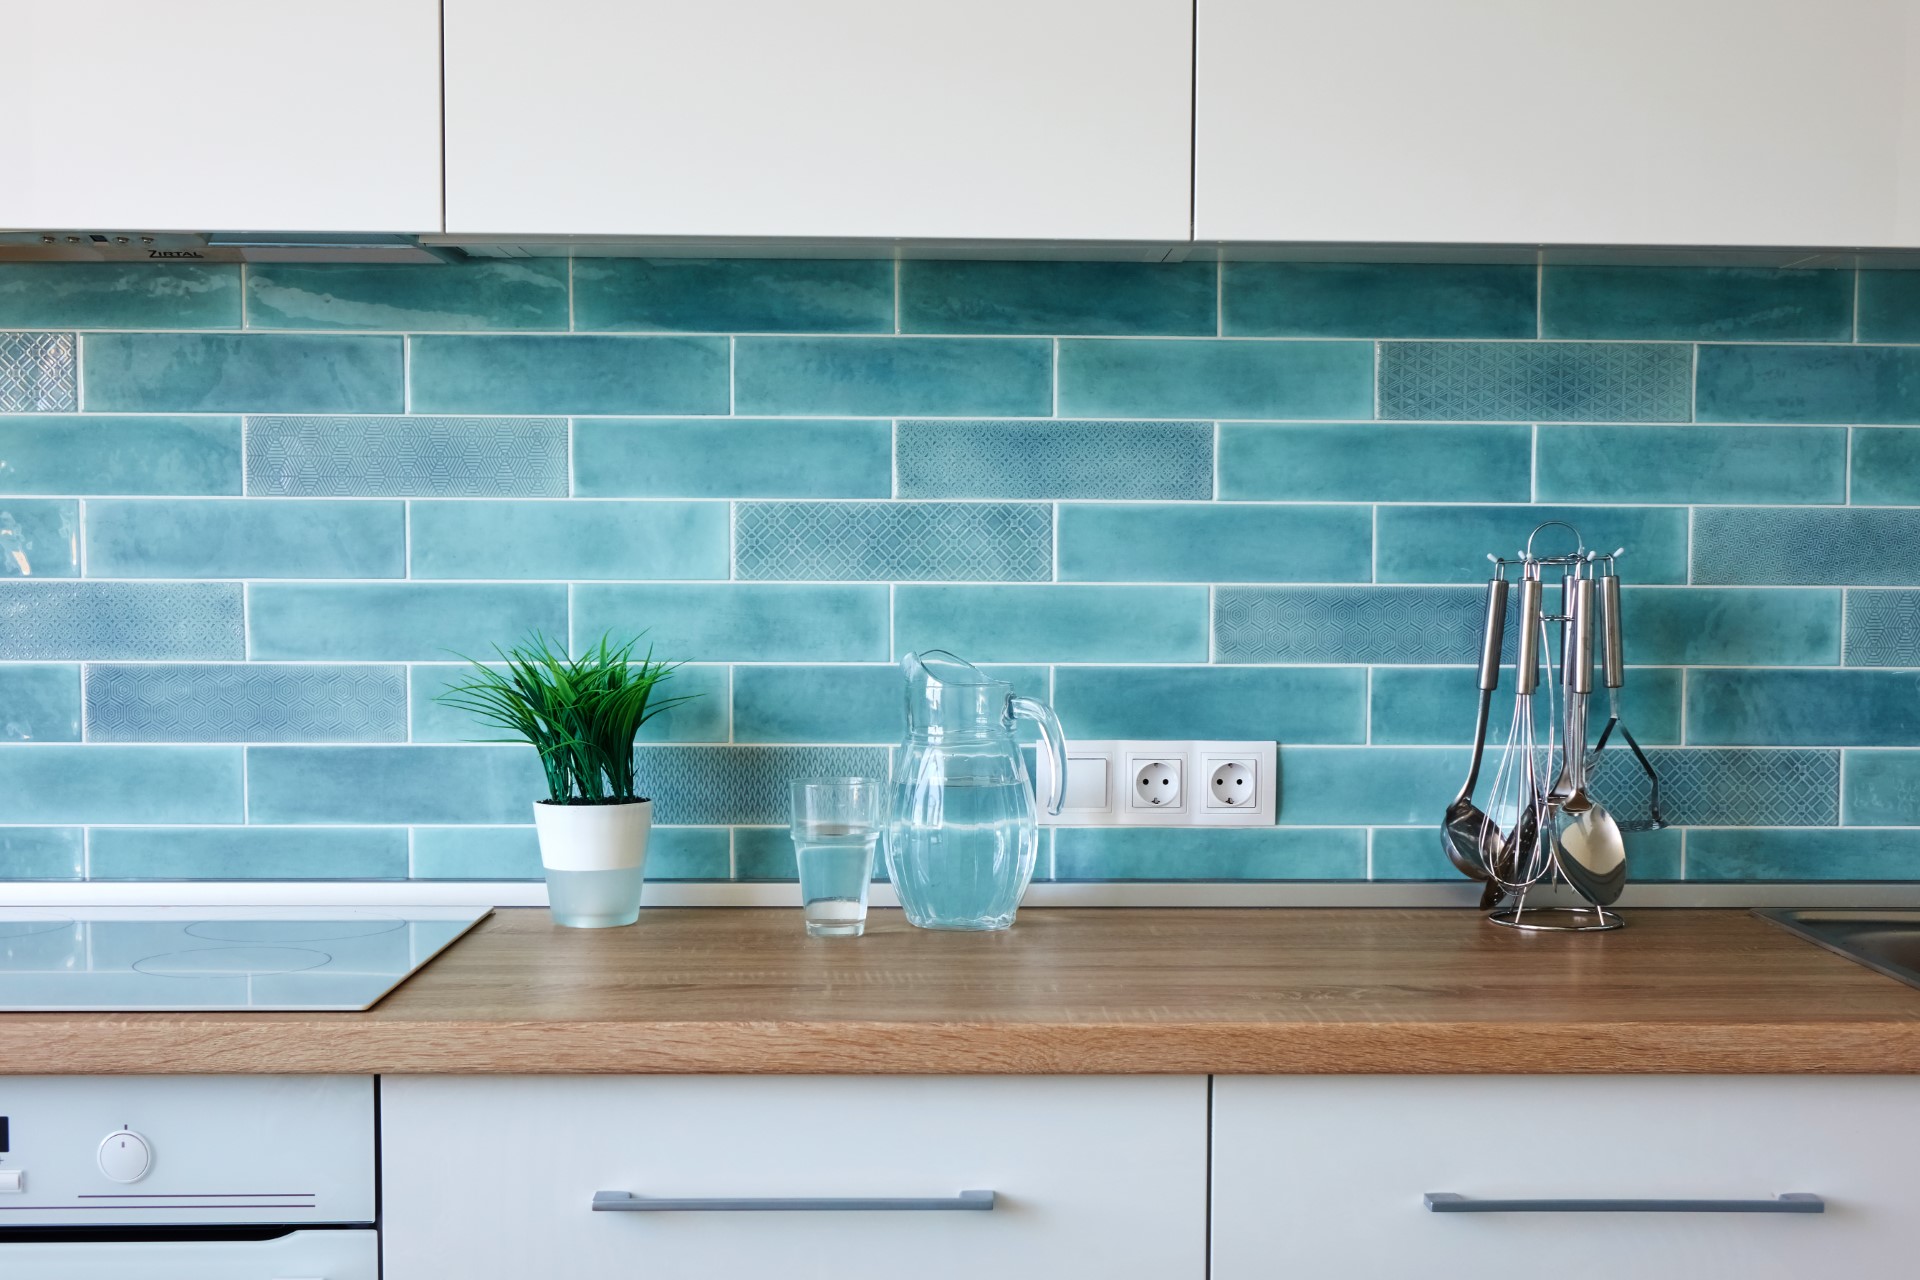 A blue backsplash coupled with a natural wood slab for a countertop is a different design that helps distinguish your kitchen from others.